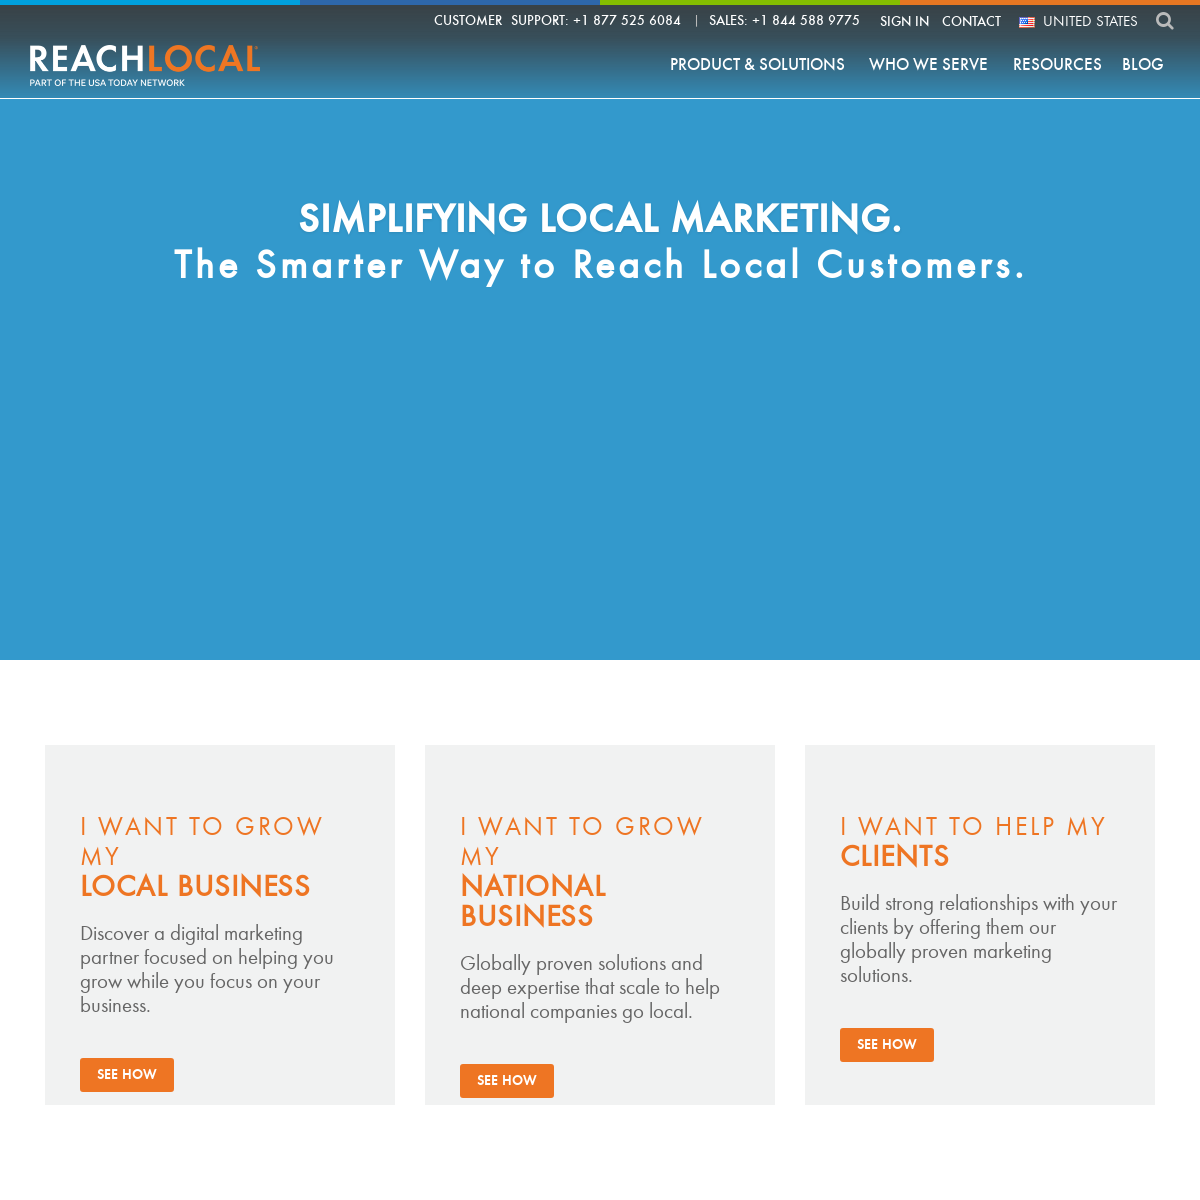 A complete backup of reachlocal.com